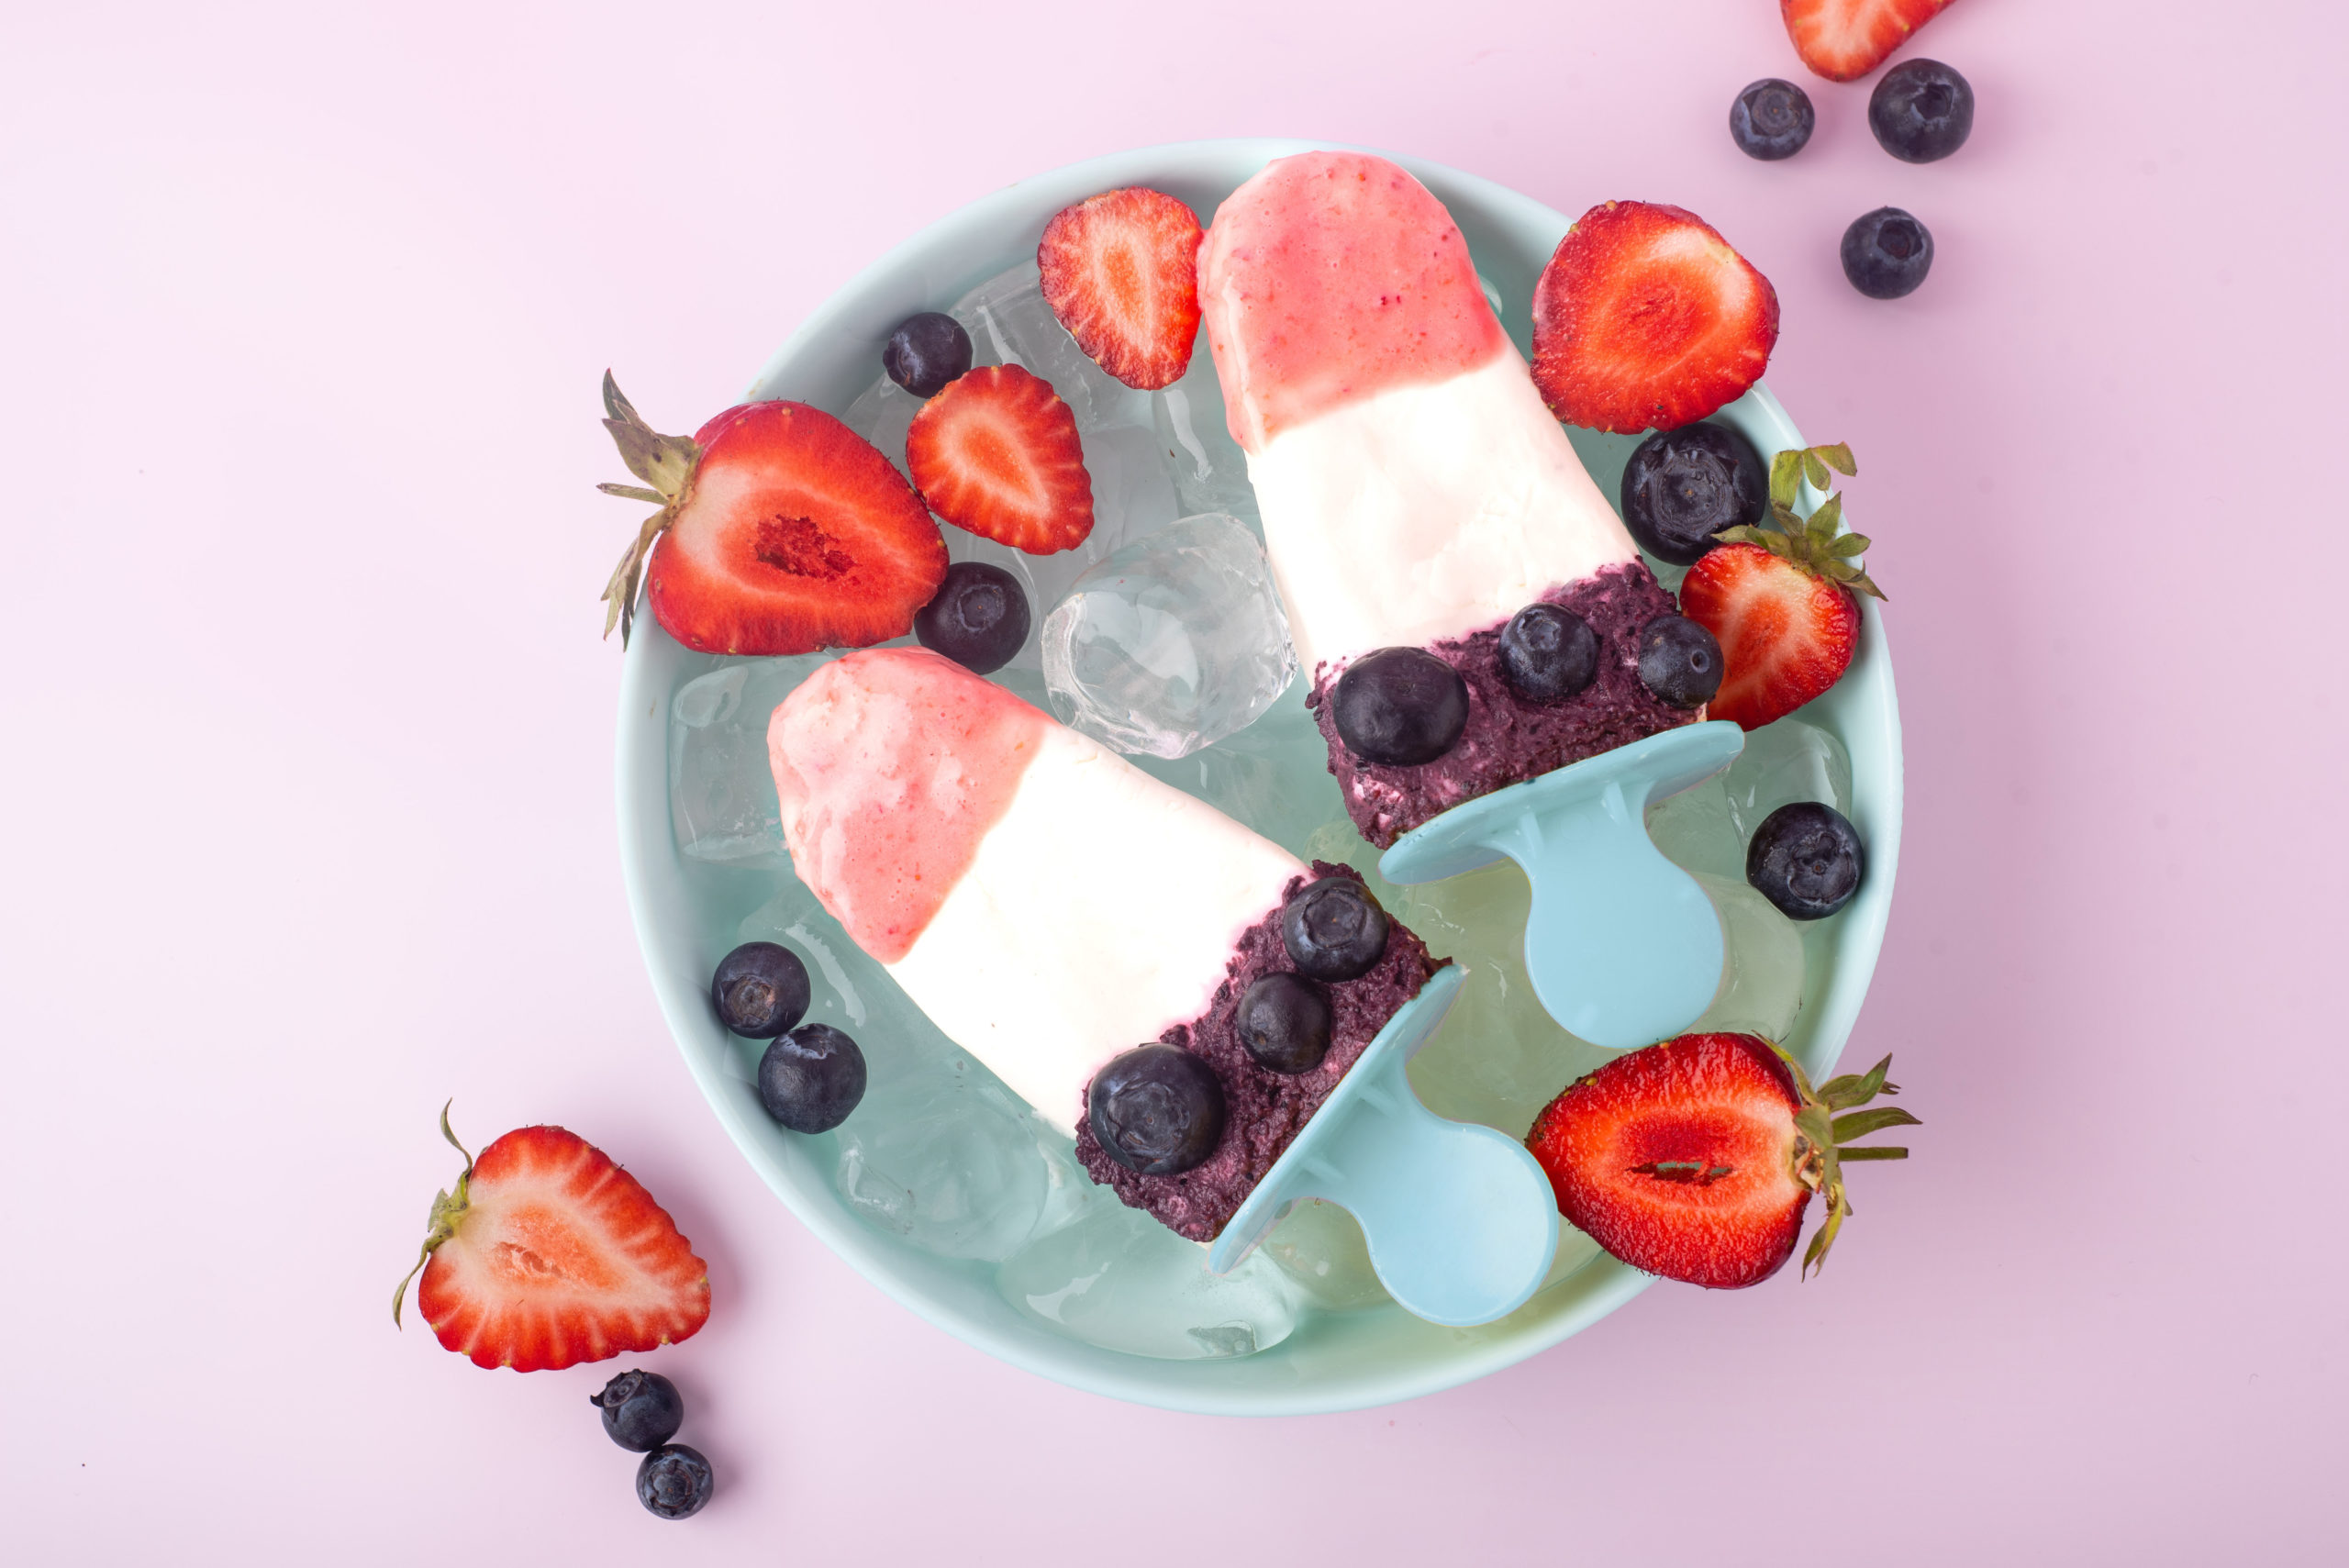 Cool Off With These Creamy 5-Ingredient Summer Popsicles